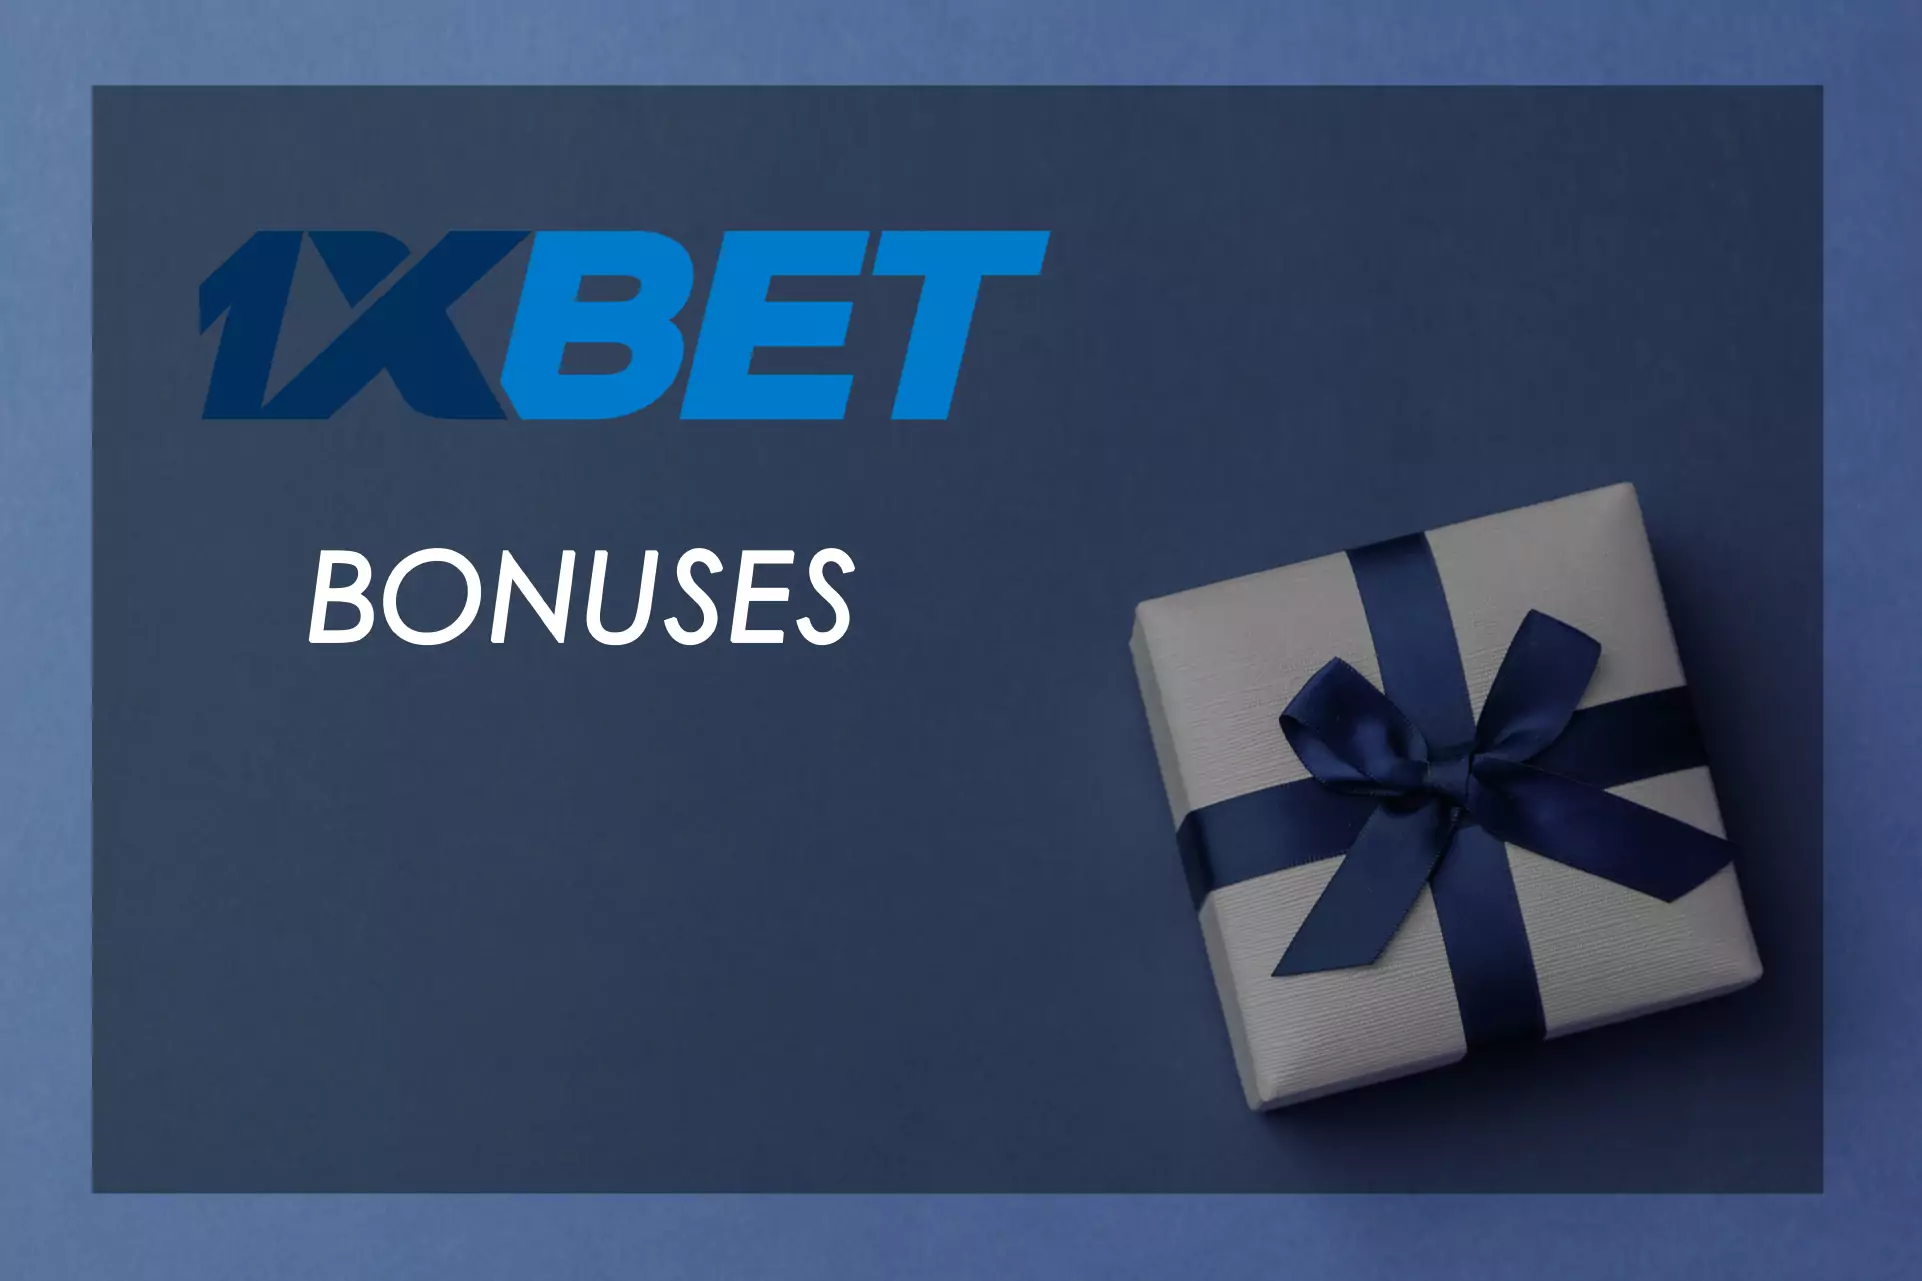 Every new player from India receives an INR 10000 bonus from 1xBet.